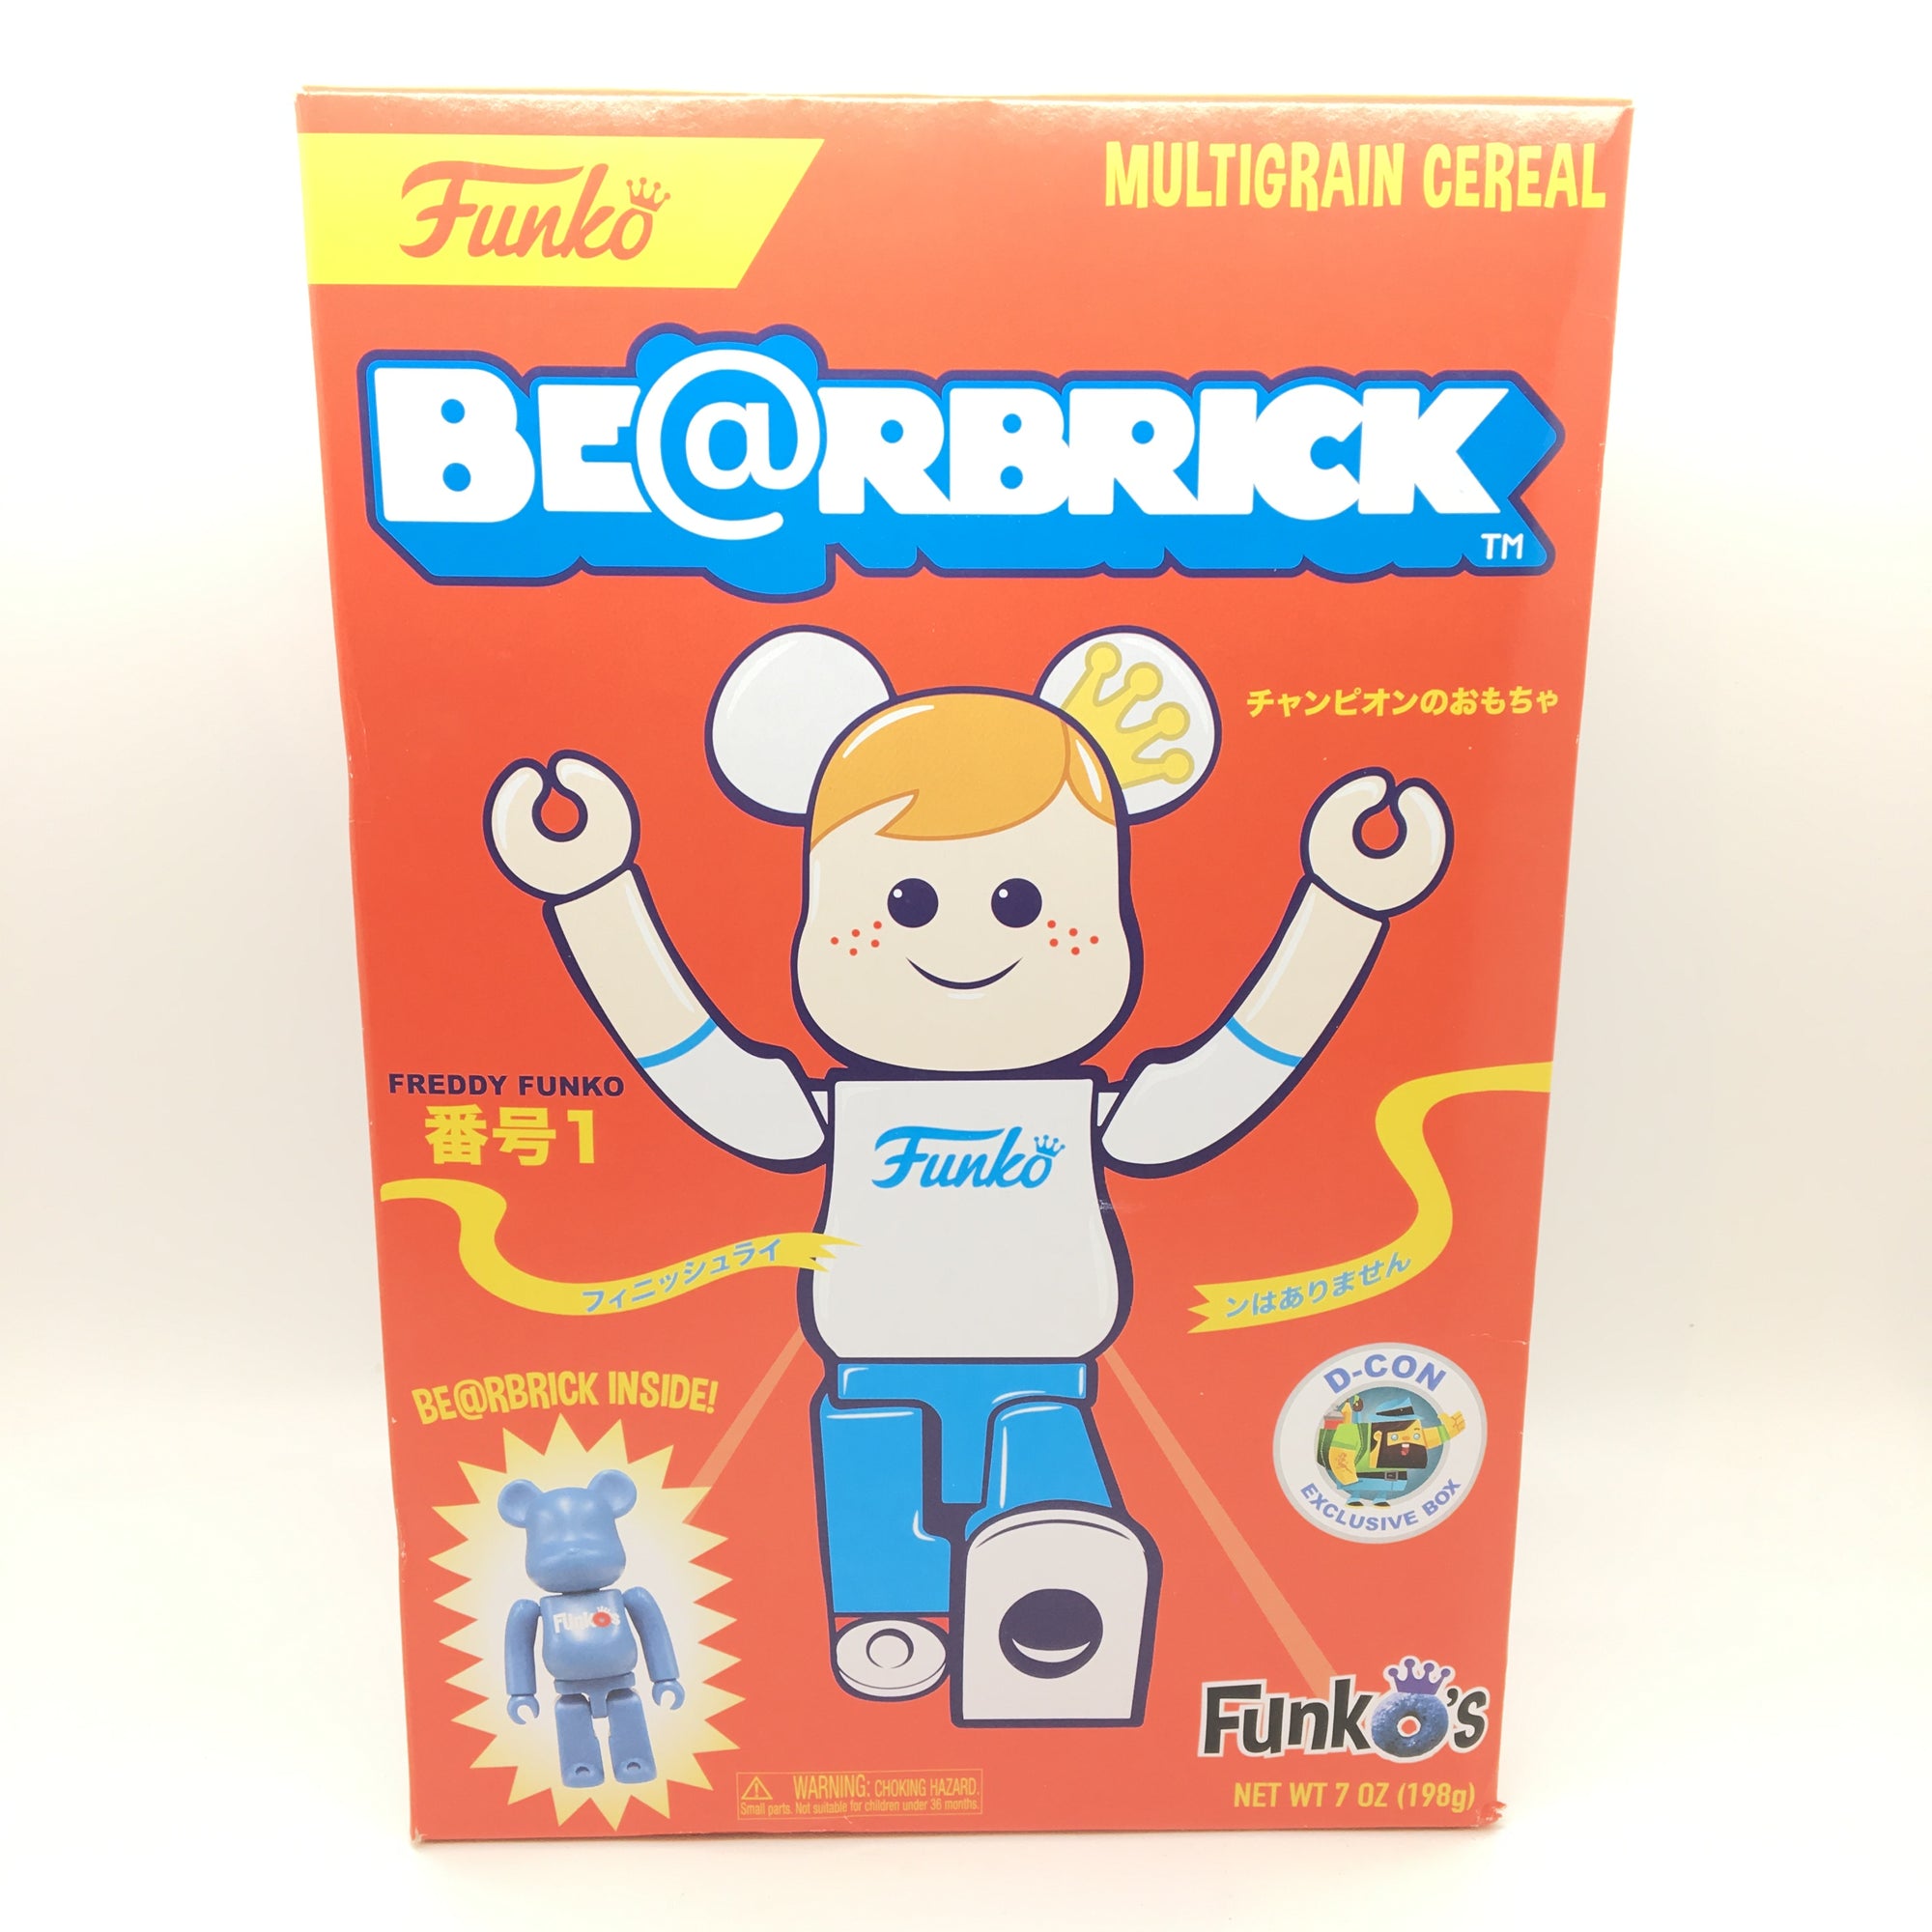 Bearbrick Funko's Cereal with 100% Bearbrick Figure Designer Con ( DCON ) Exclusive - Red Box